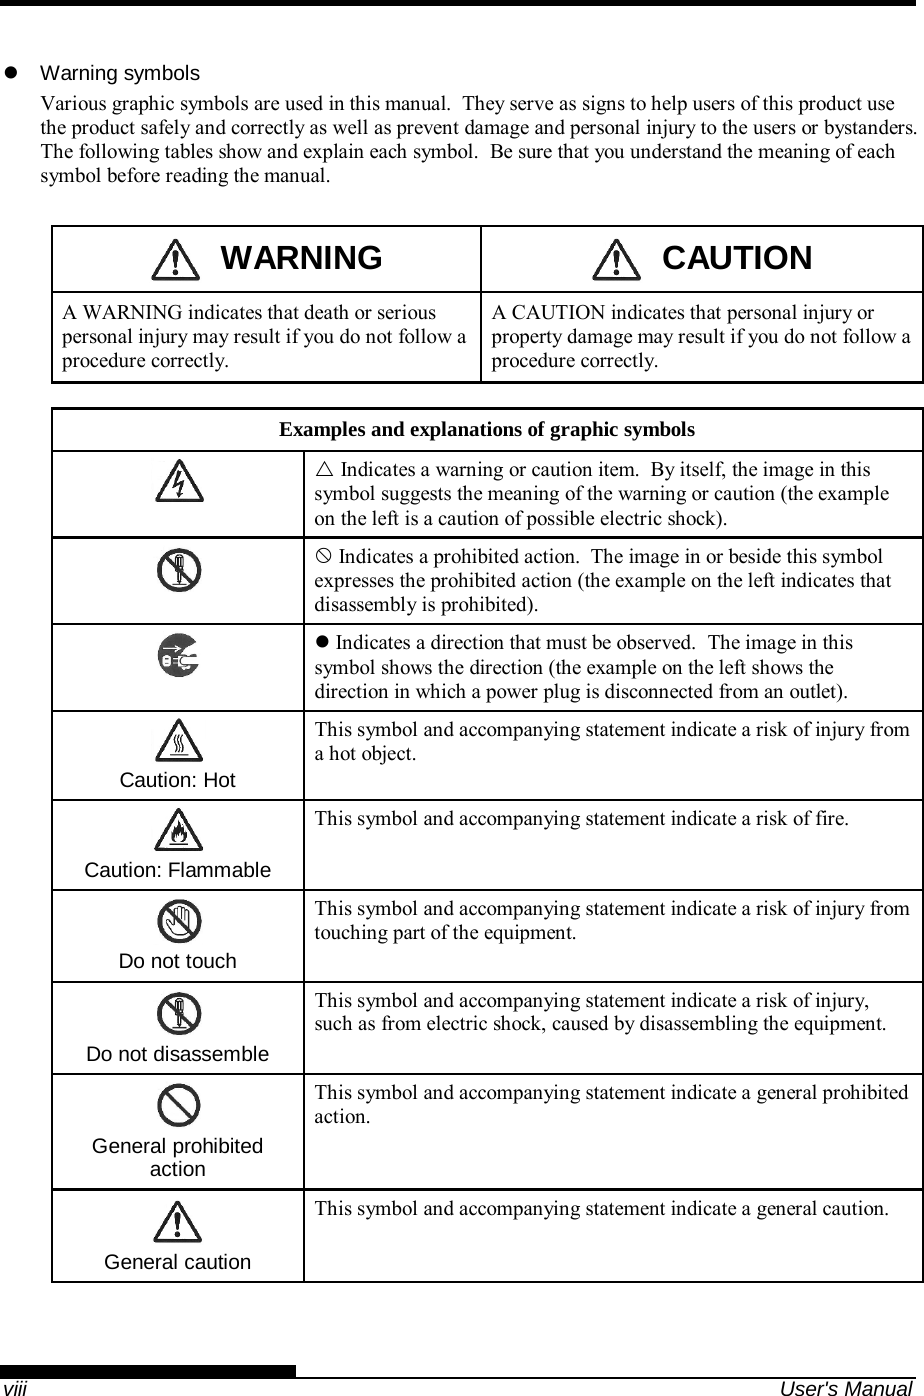    viii  User&apos;s Manual  Warning symbols Various graphic symbols are used in this manual.  They serve as signs to help users of this product use the product safely and correctly as well as prevent damage and personal injury to the users or bystanders.  The following tables show and explain each symbol.  Be sure that you understand the meaning of each symbol before reading the manual.    WARNING    CAUTION A WARNING indicates that death or serious personal injury may result if you do not follow a procedure correctly. A CAUTION indicates that personal injury or property damage may result if you do not follow a procedure correctly.  Examples and explanations of graphic symbols   Indicates a warning or caution item.  By itself, the image in this symbol suggests the meaning of the warning or caution (the example on the left is a caution of possible electric shock).   Indicates a prohibited action.  The image in or beside this symbol expresses the prohibited action (the example on the left indicates that disassembly is prohibited).   Indicates a direction that must be observed.  The image in this symbol shows the direction (the example on the left shows the direction in which a power plug is disconnected from an outlet).  Caution: Hot This symbol and accompanying statement indicate a risk of injury from a hot object.  Caution: Flammable This symbol and accompanying statement indicate a risk of fire.  Do not touch This symbol and accompanying statement indicate a risk of injury from touching part of the equipment.  Do not disassemble This symbol and accompanying statement indicate a risk of injury, such as from electric shock, caused by disassembling the equipment.  General prohibited action This symbol and accompanying statement indicate a general prohibited action.  General caution This symbol and accompanying statement indicate a general caution. 